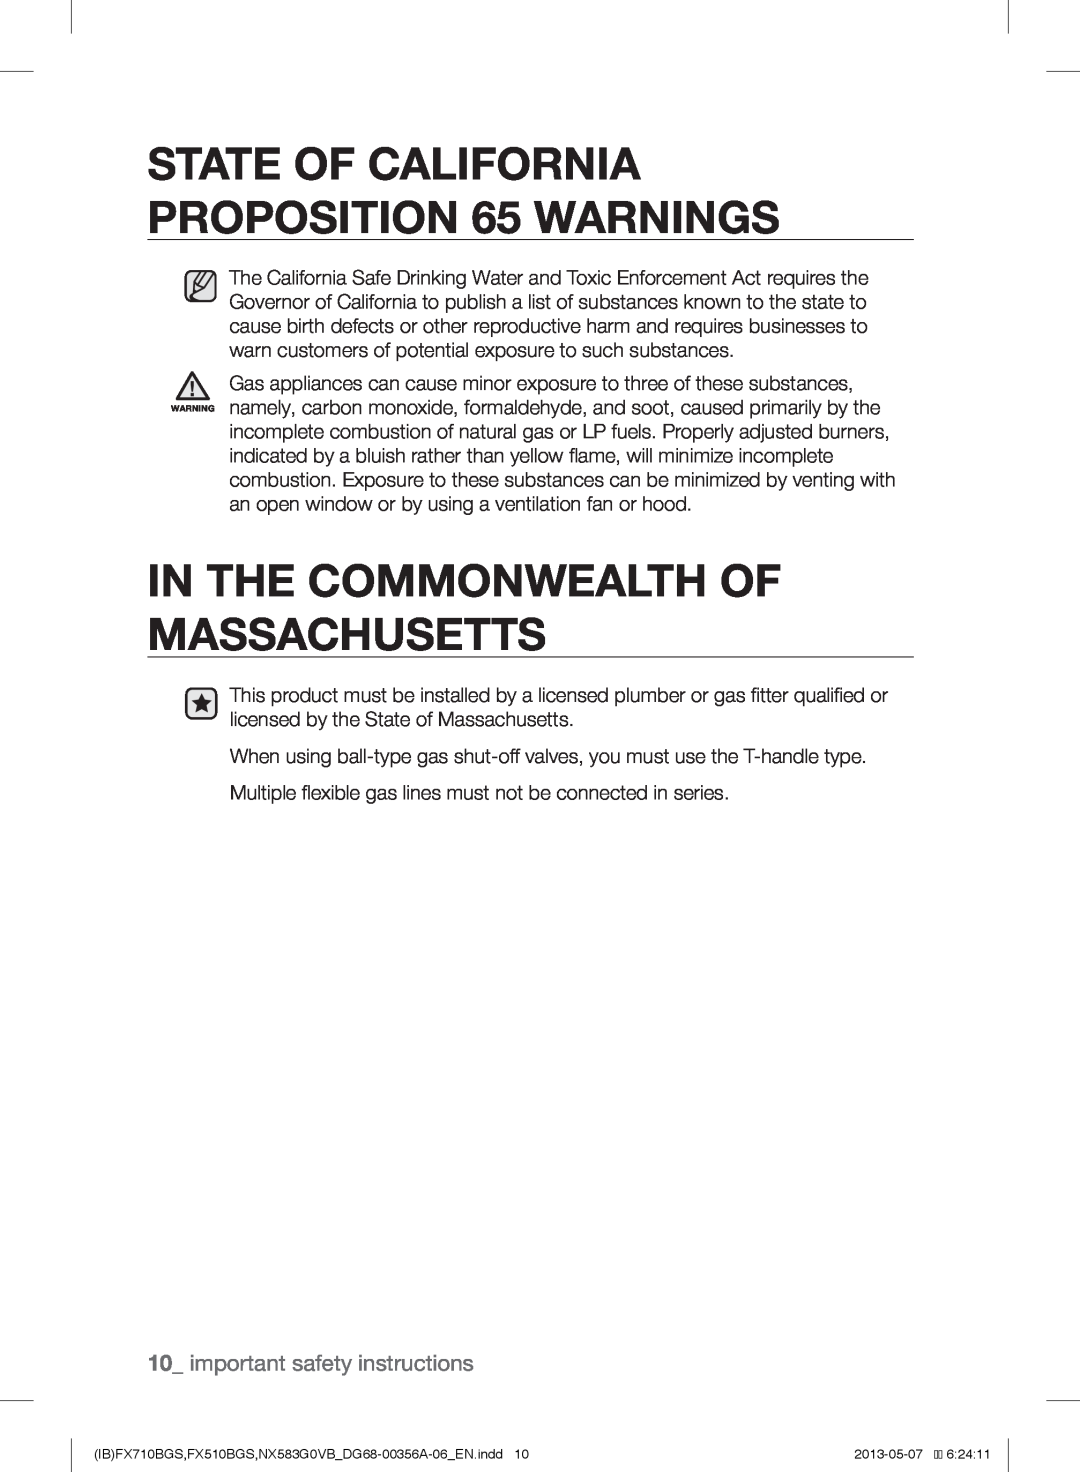 Samsung NX583GOVBSR, NX583GOVBBB In The Commonwealth Of Massachusetts, STATE OF CALIFORNIA PROPOSITION 65 WARNINGS 